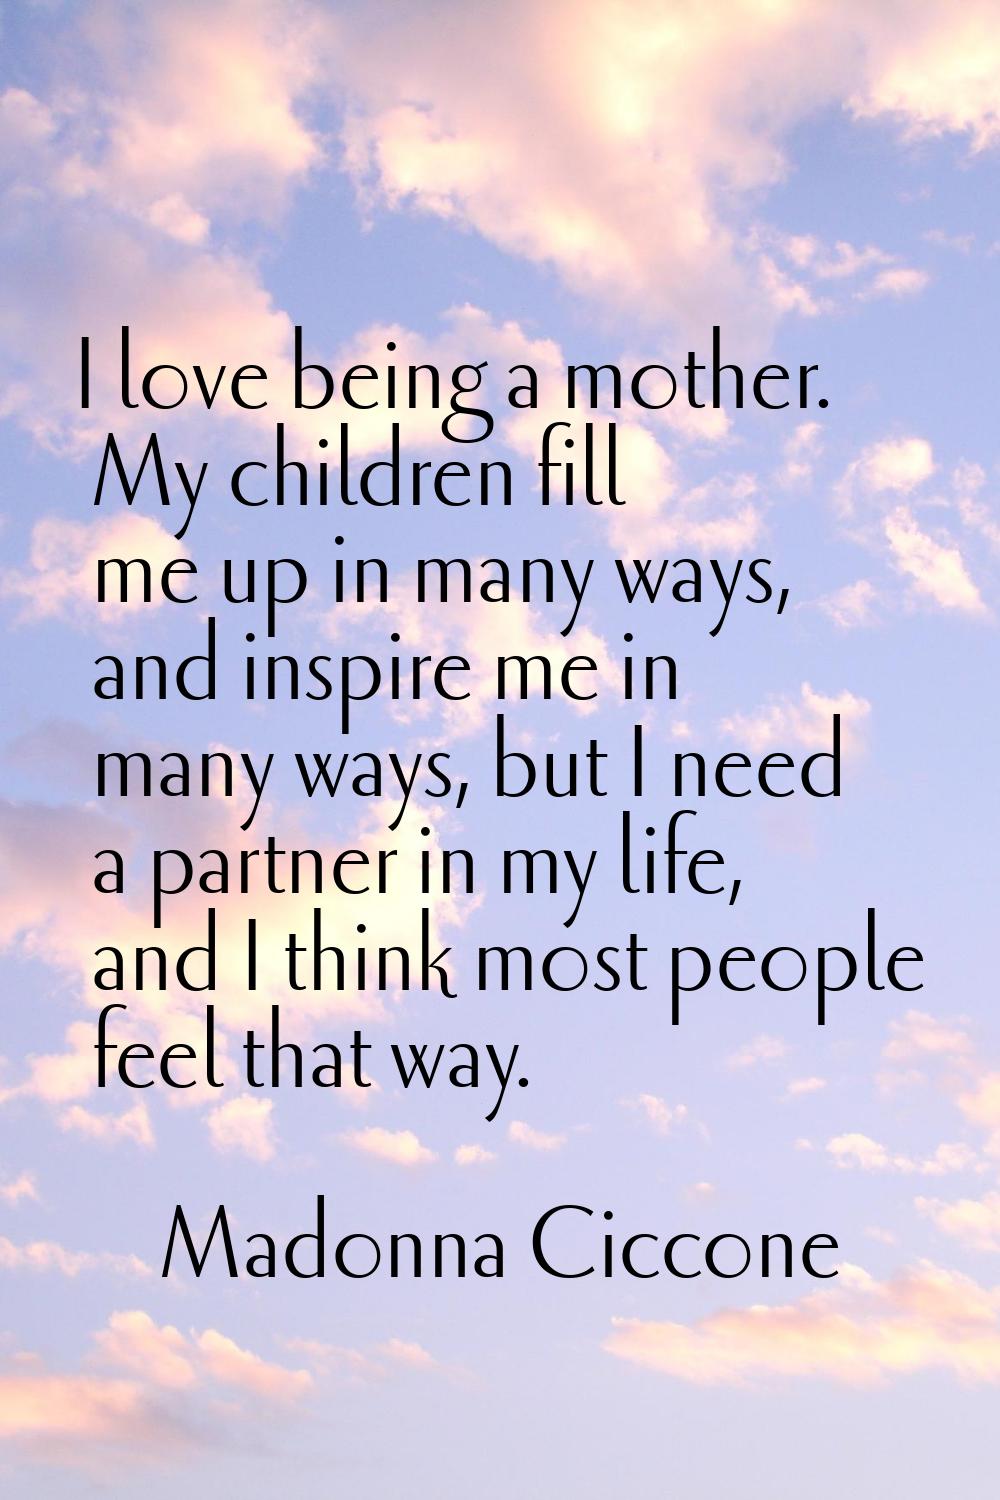 I love being a mother. My children fill me up in many ways, and inspire me in many ways, but I need